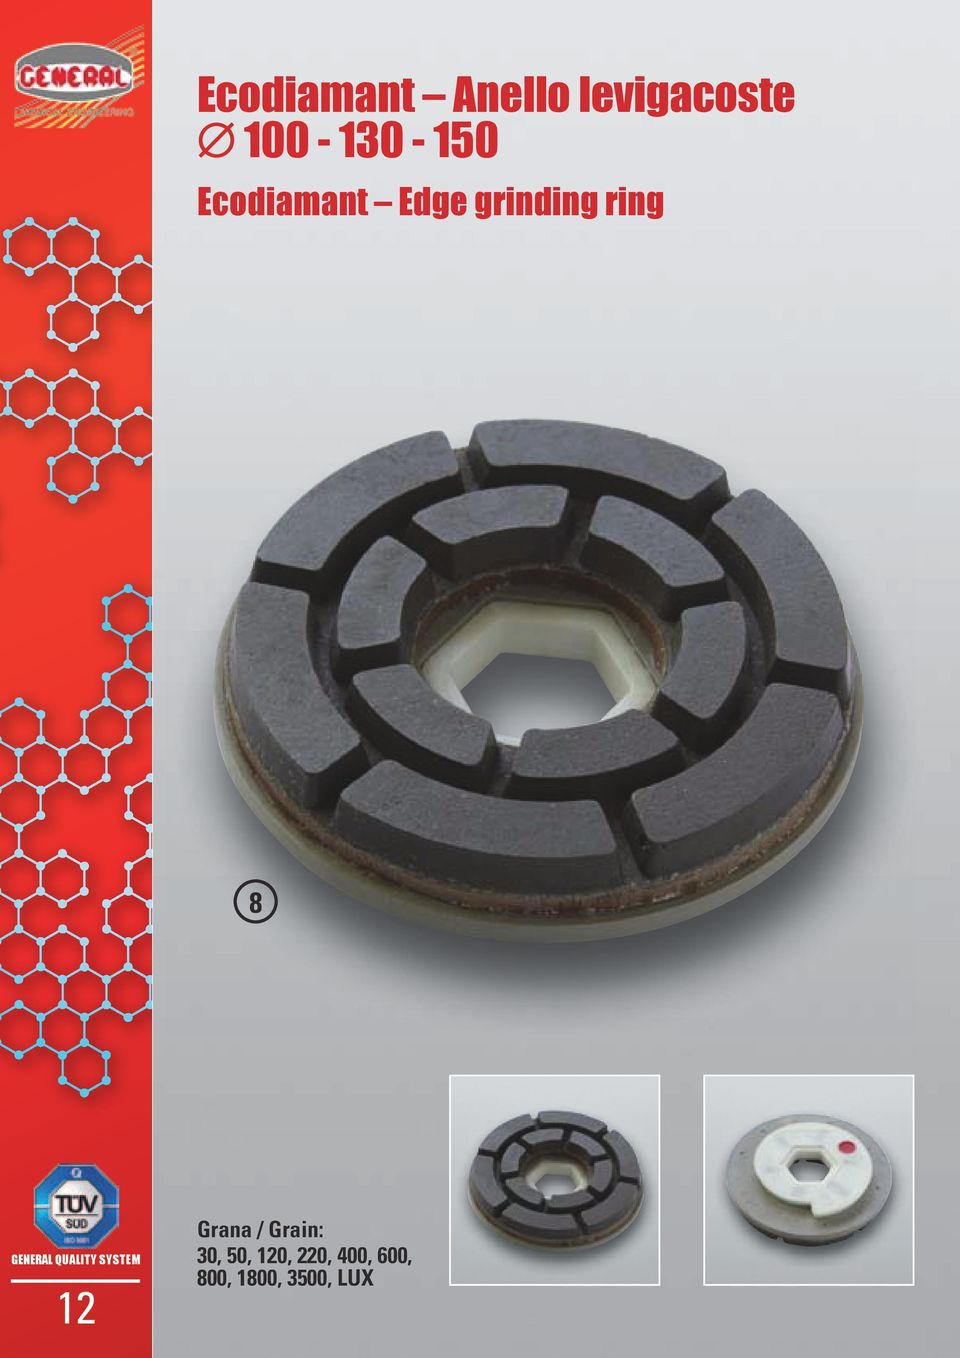 grinding ring 8 GENERAL QUALITY